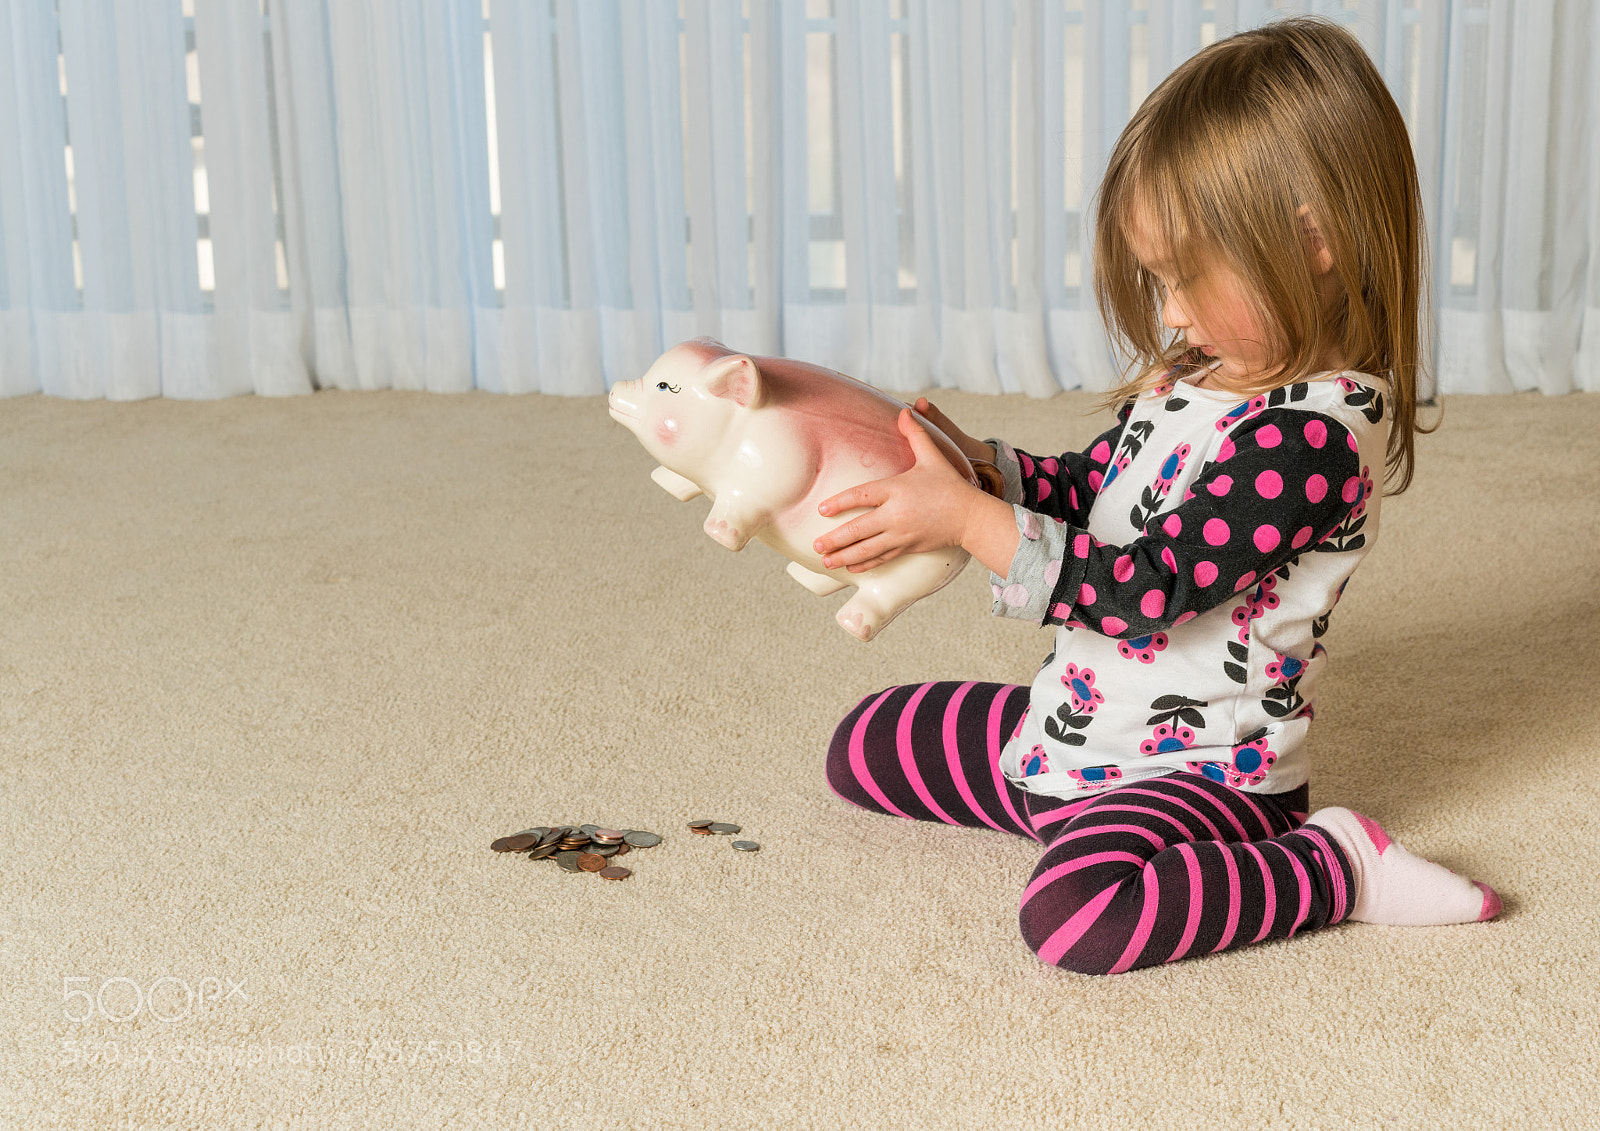 Sony a7R II sample photo. Young toddler getting money photography